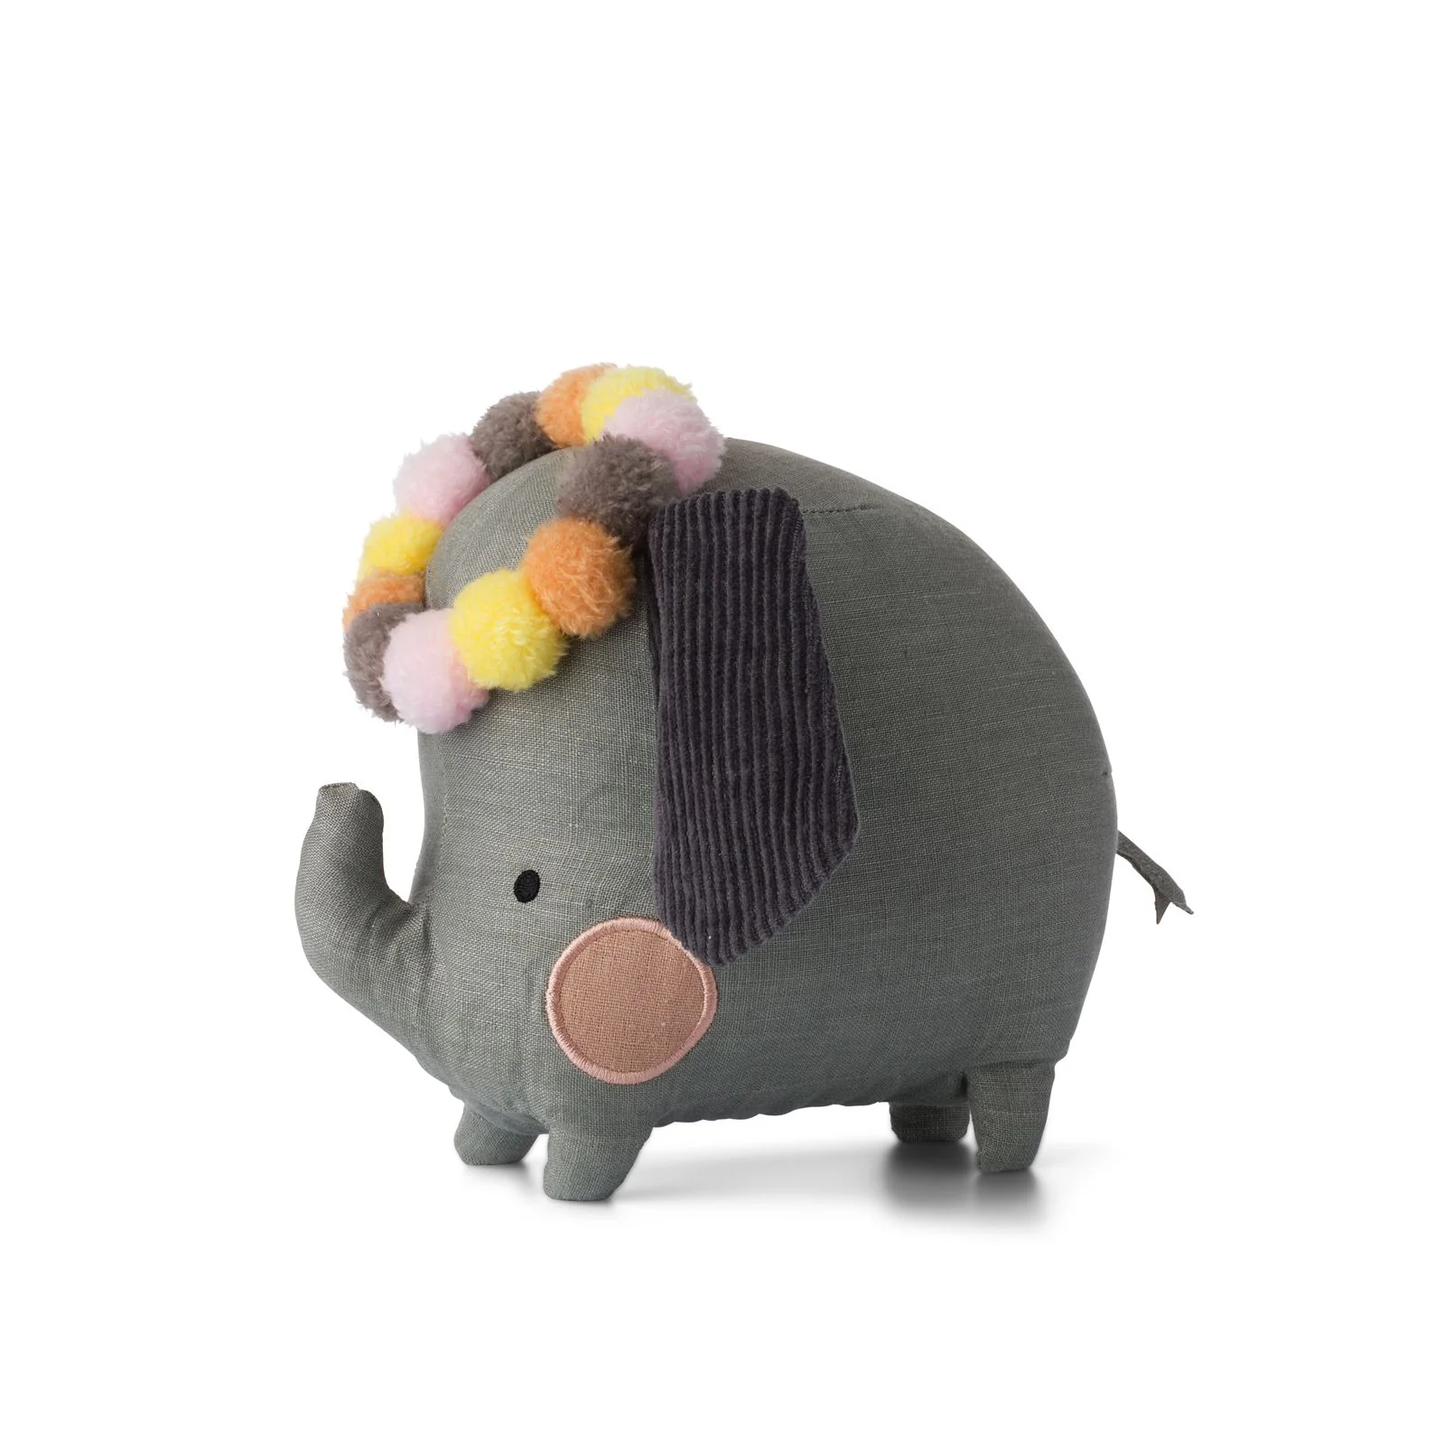 Picca LouLou Elephant in Gift Box